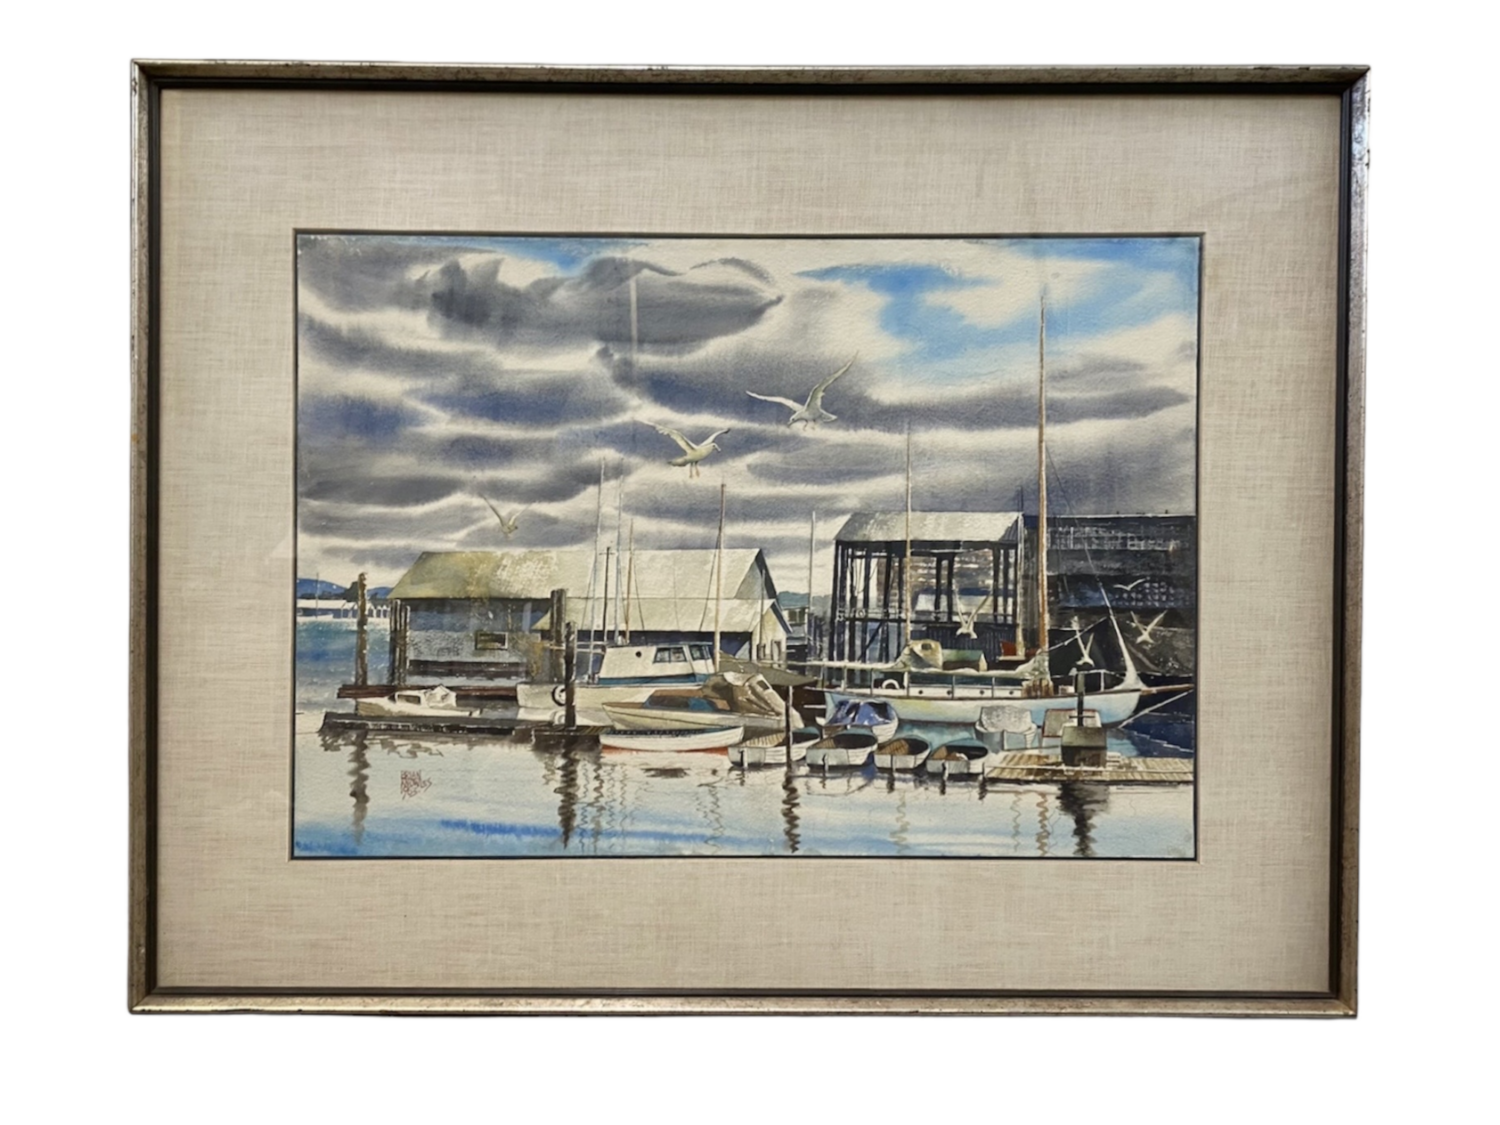 35"x27” Mid Century Original Watercolour Painting “Fish Boats at Coal Harbour"by Brian Knowles